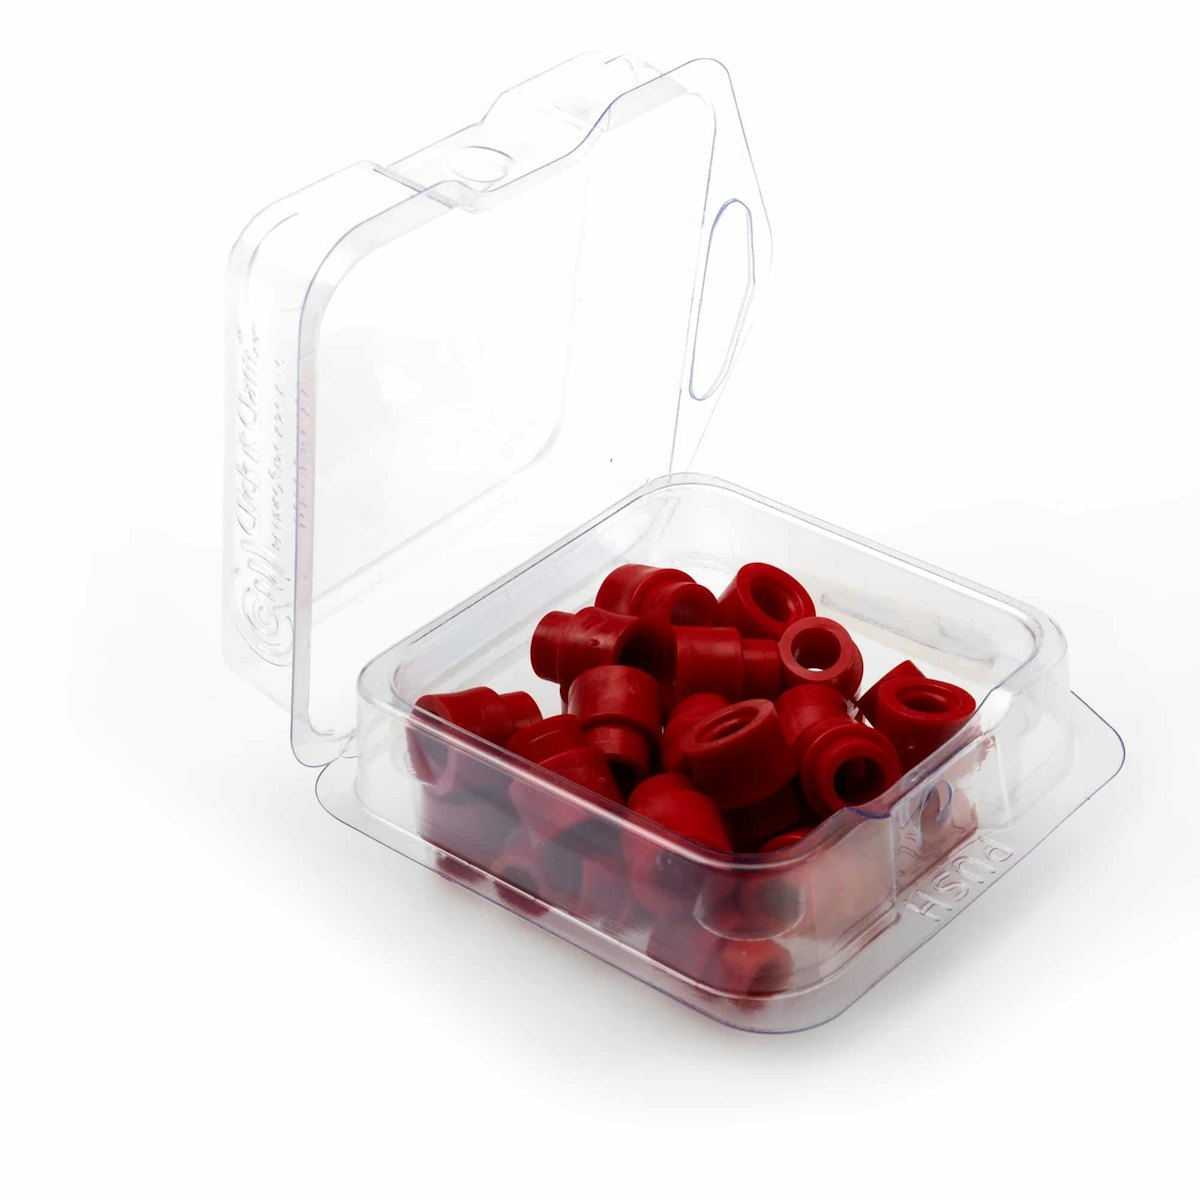 Polyethylene Packaging - Jamestown Container